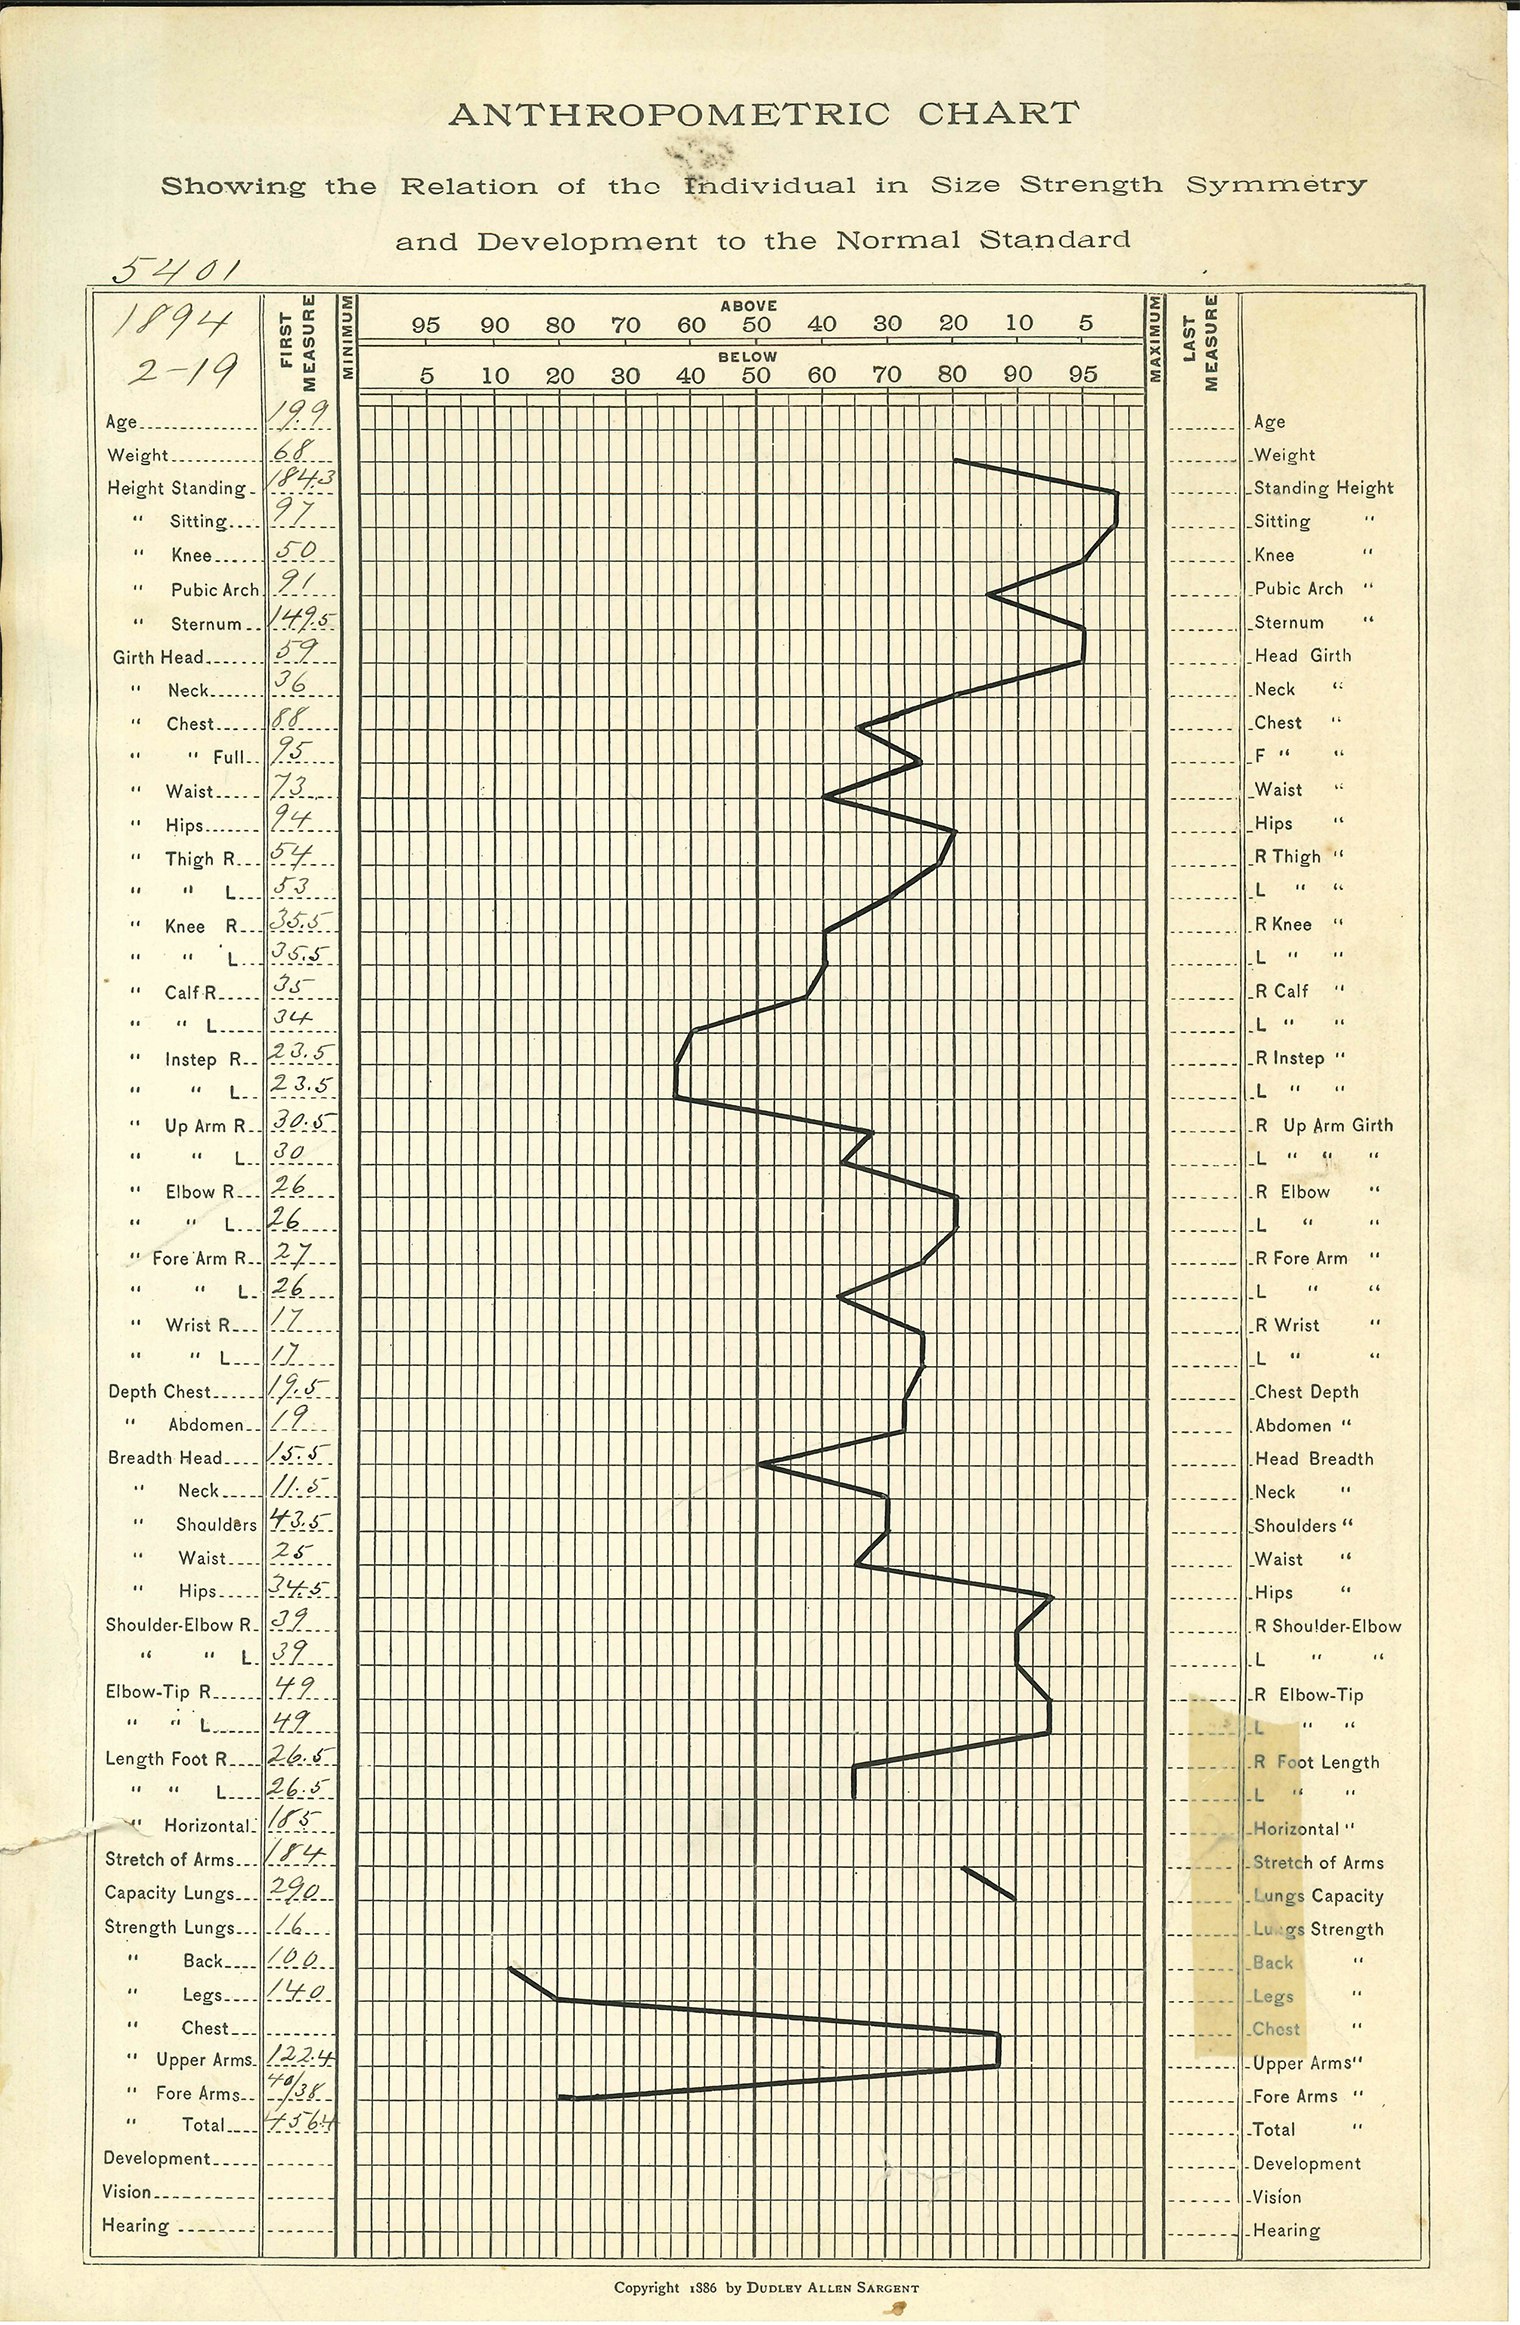 Graph with title "Anthropometric Chart."